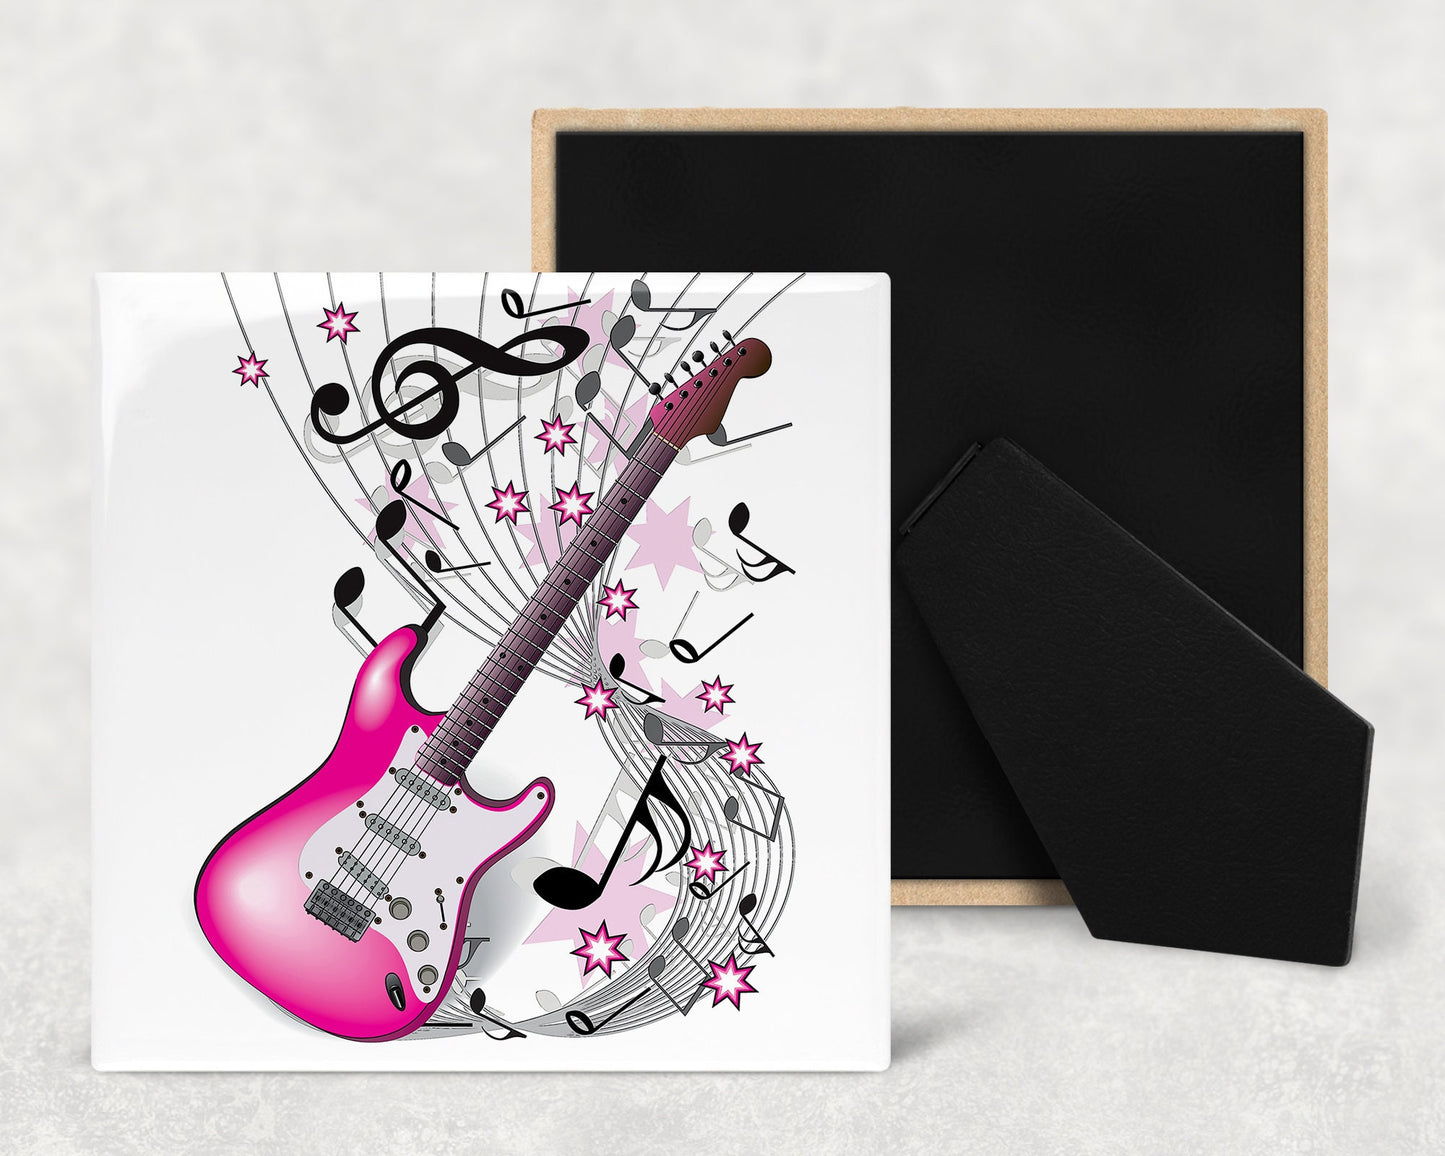 Pink or Blue Guitar Illustration Art Decorative Ceramic Tile with Optional Easel Back - Available in 3 Sizes